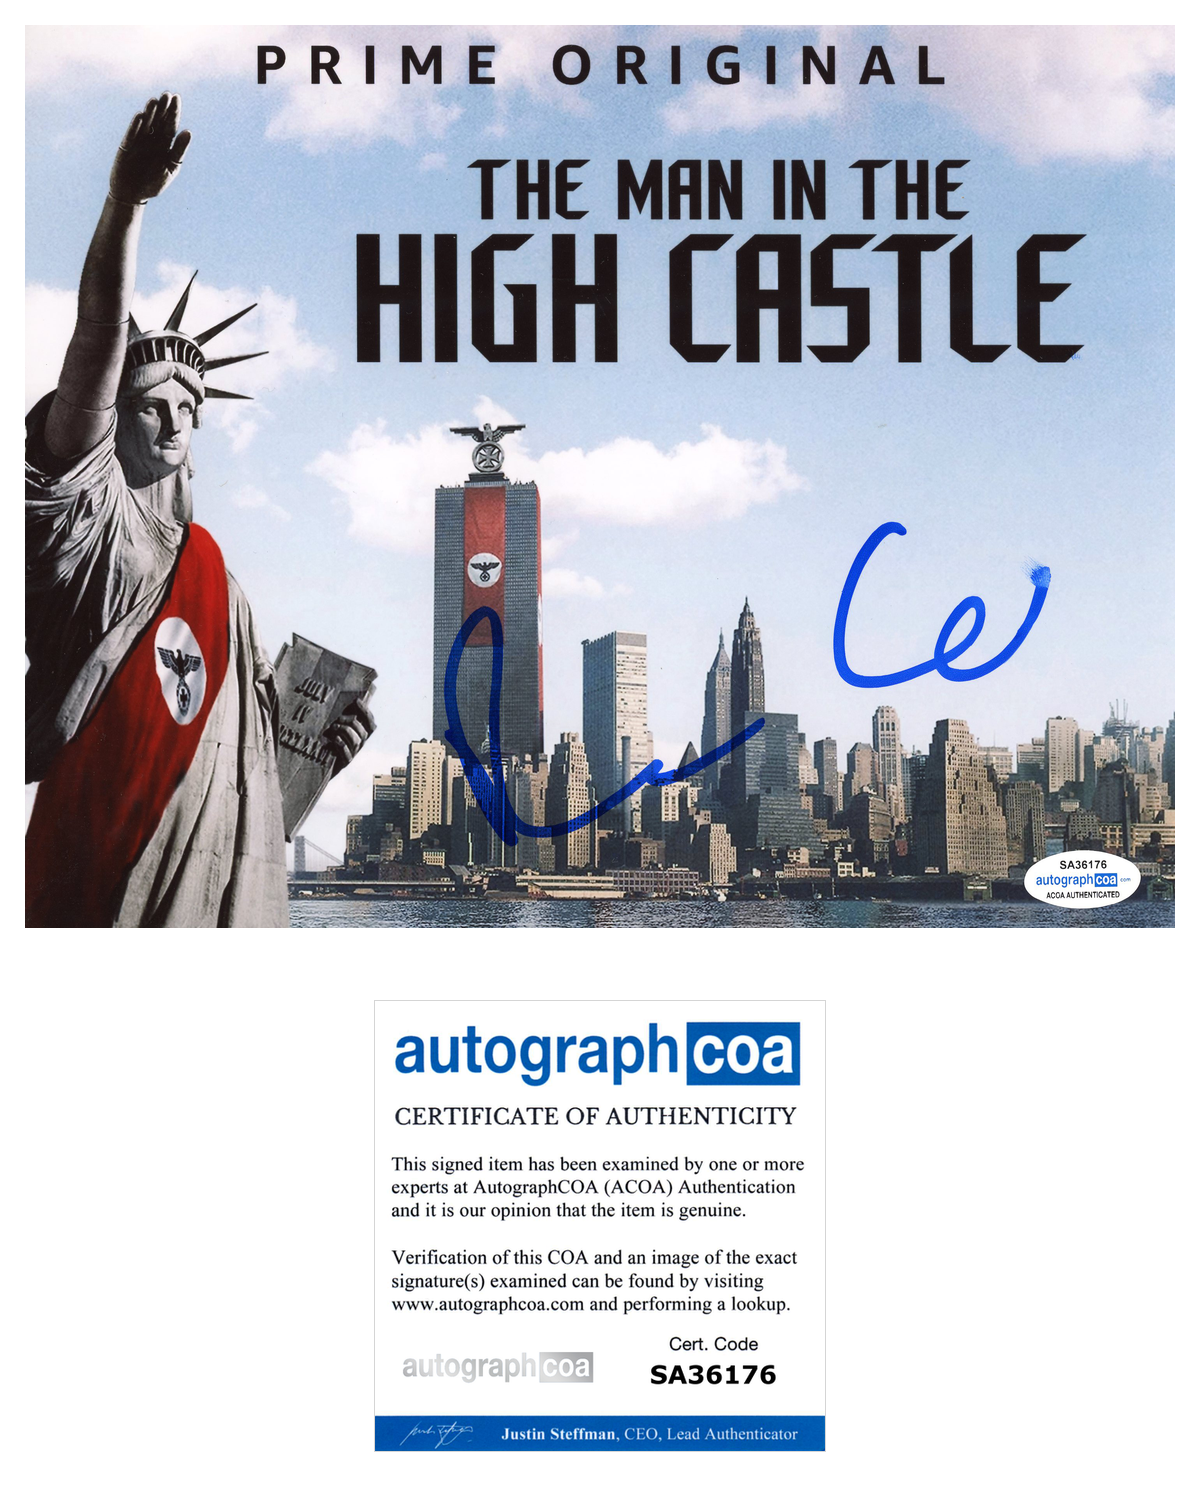 Rufus Sewell Signed Autographed 8x10 Photo Poster painting The Man In The High Castle ACOA COA